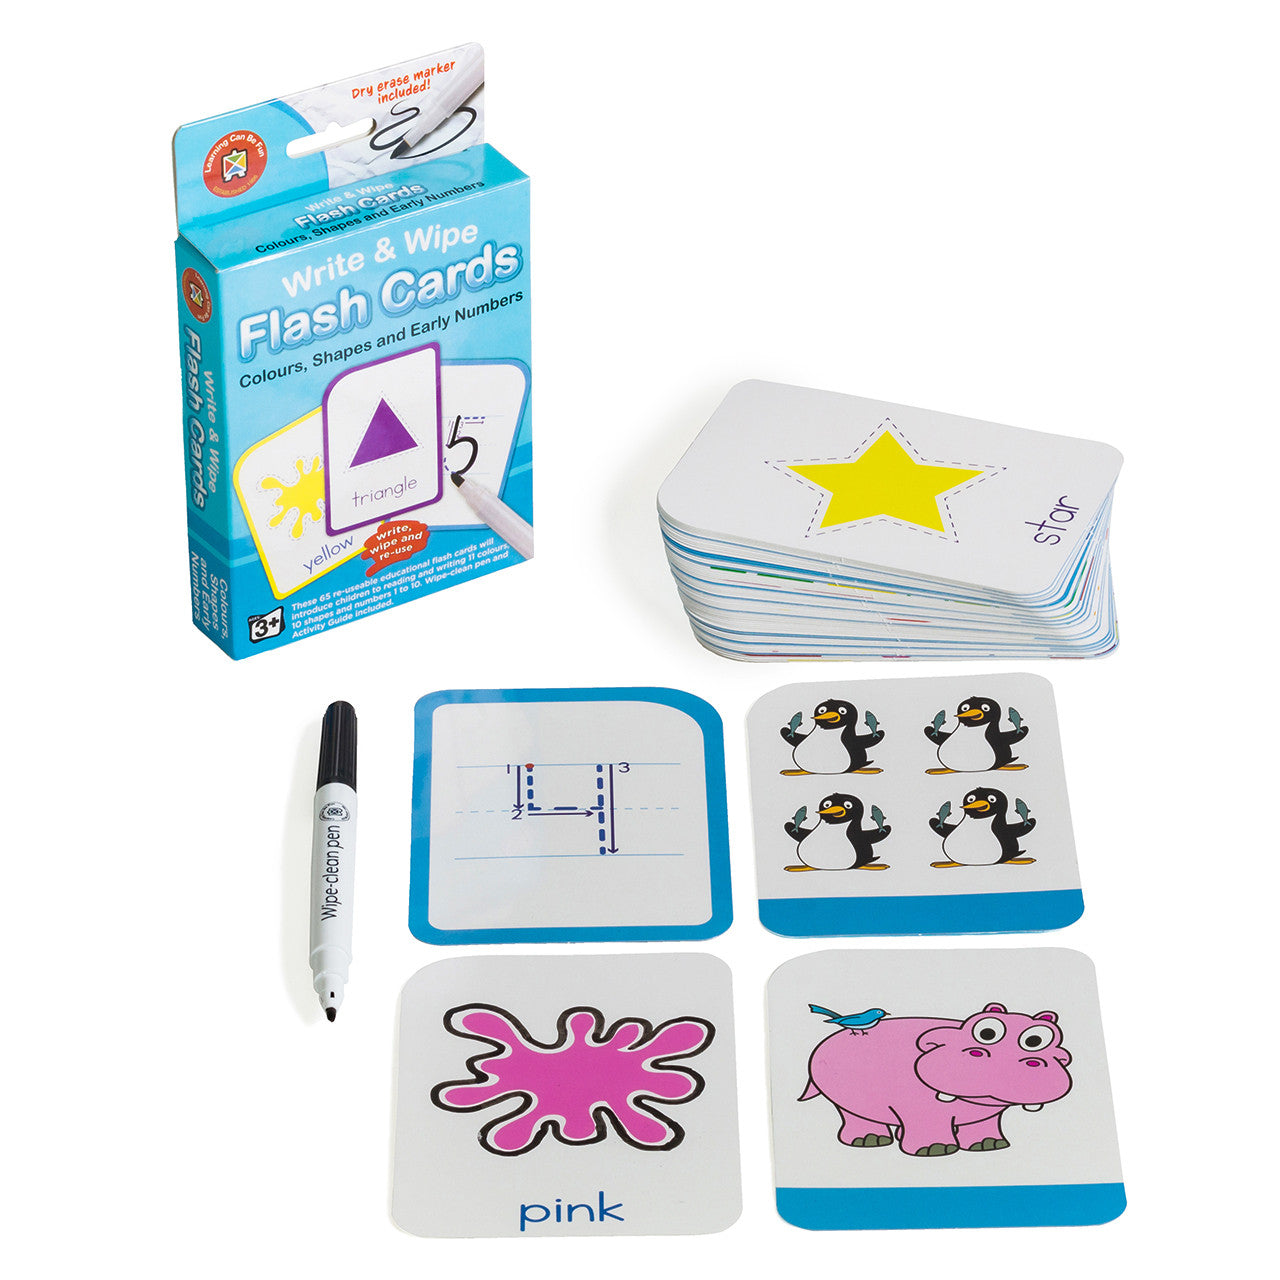 Write & Wipe Flash Cards Colour Shape Numbers